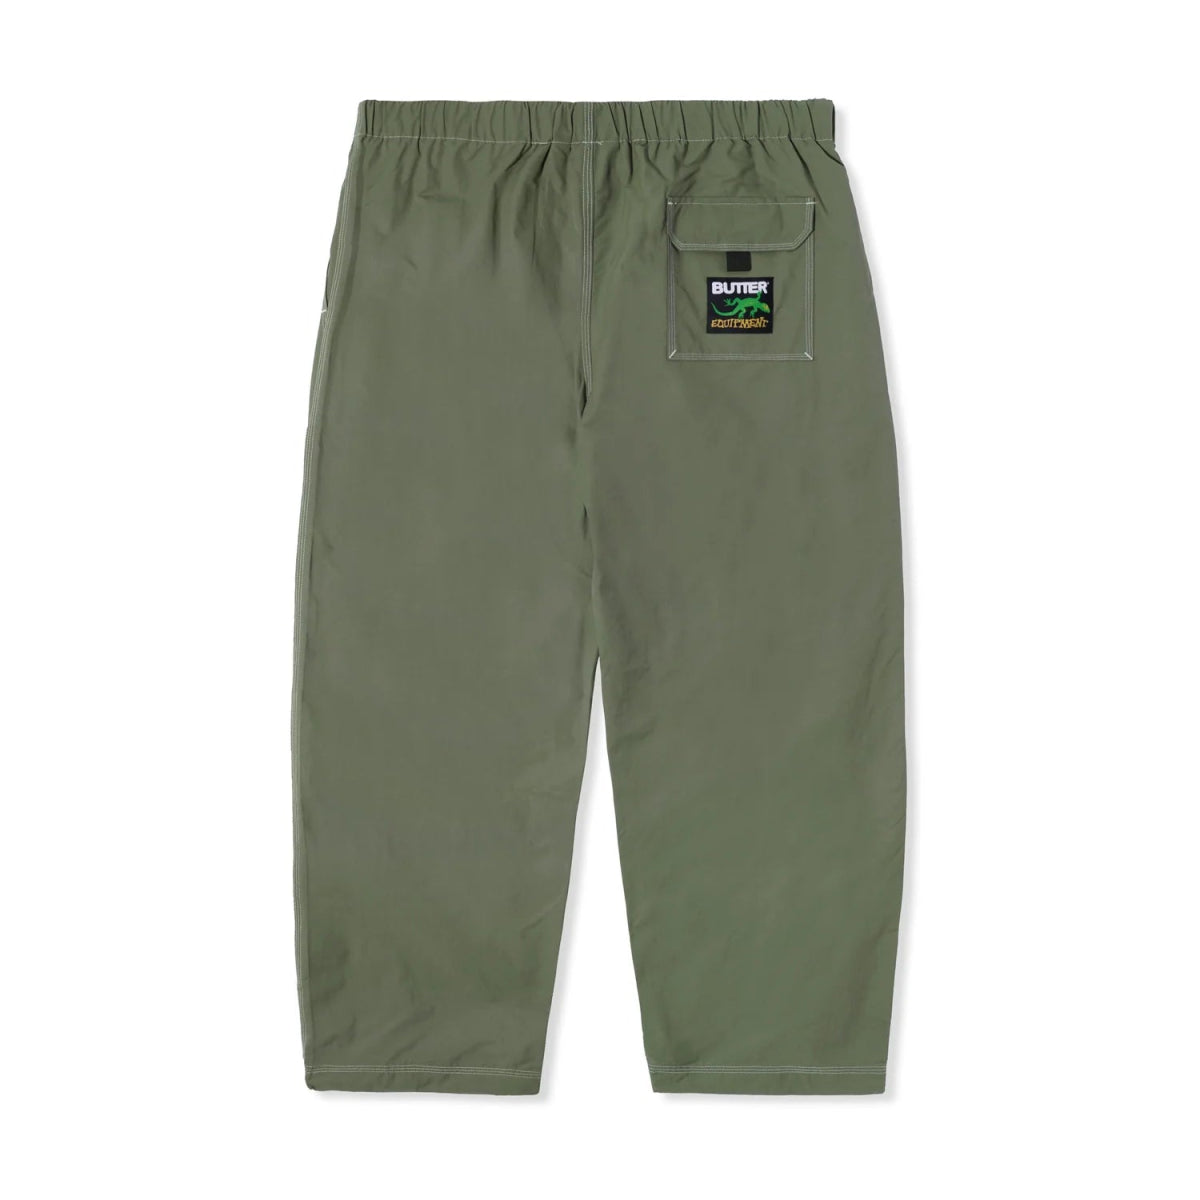 Butter Goods Climber Pants in Army - Goodnews Skateshop